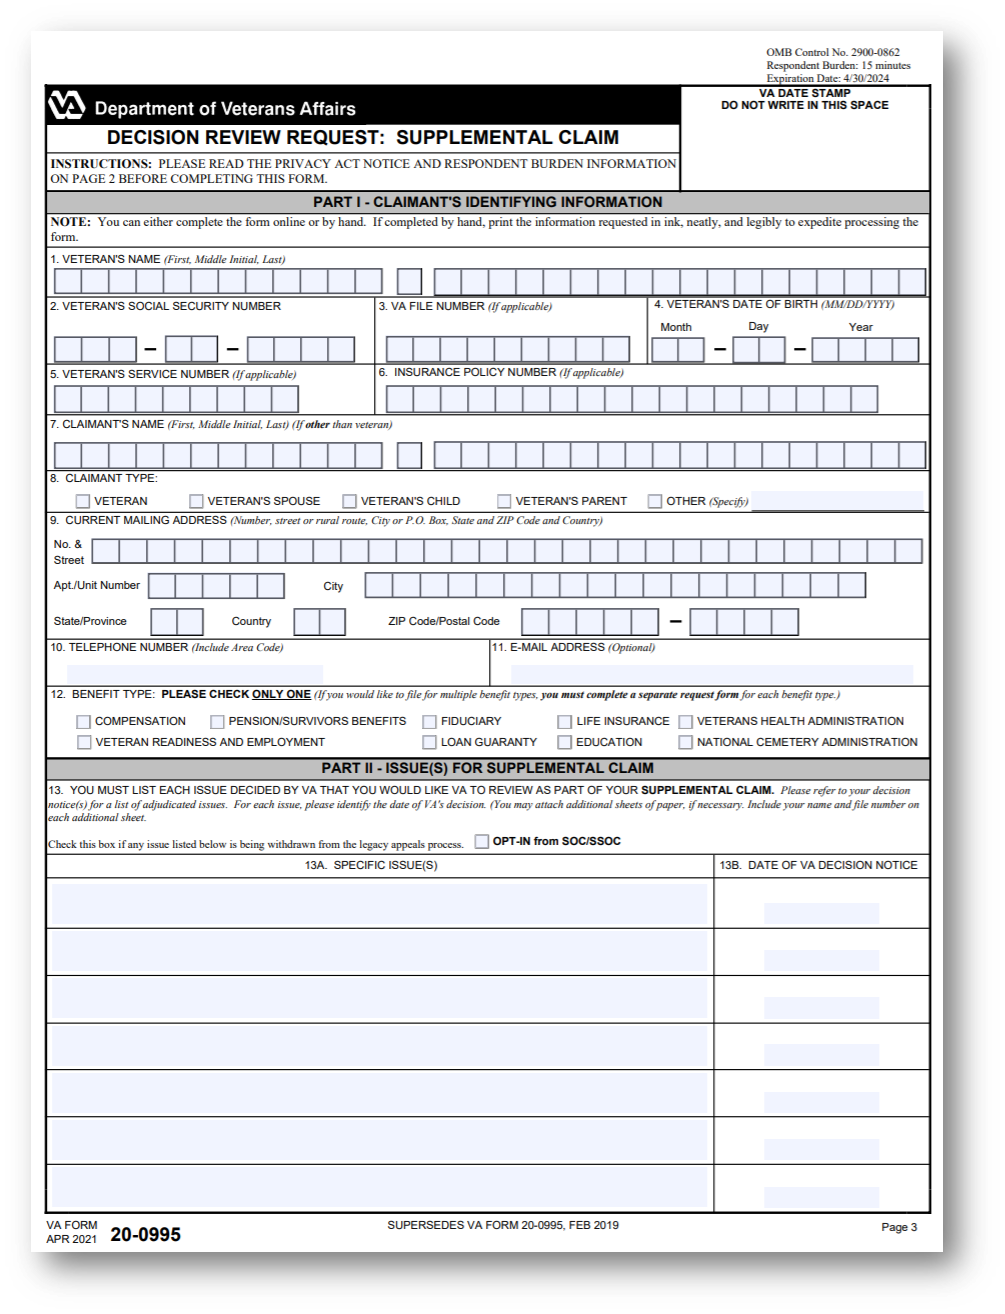 How to Increase My VA Disability Rating with VA Supplemental Claim VA Form 20 0995